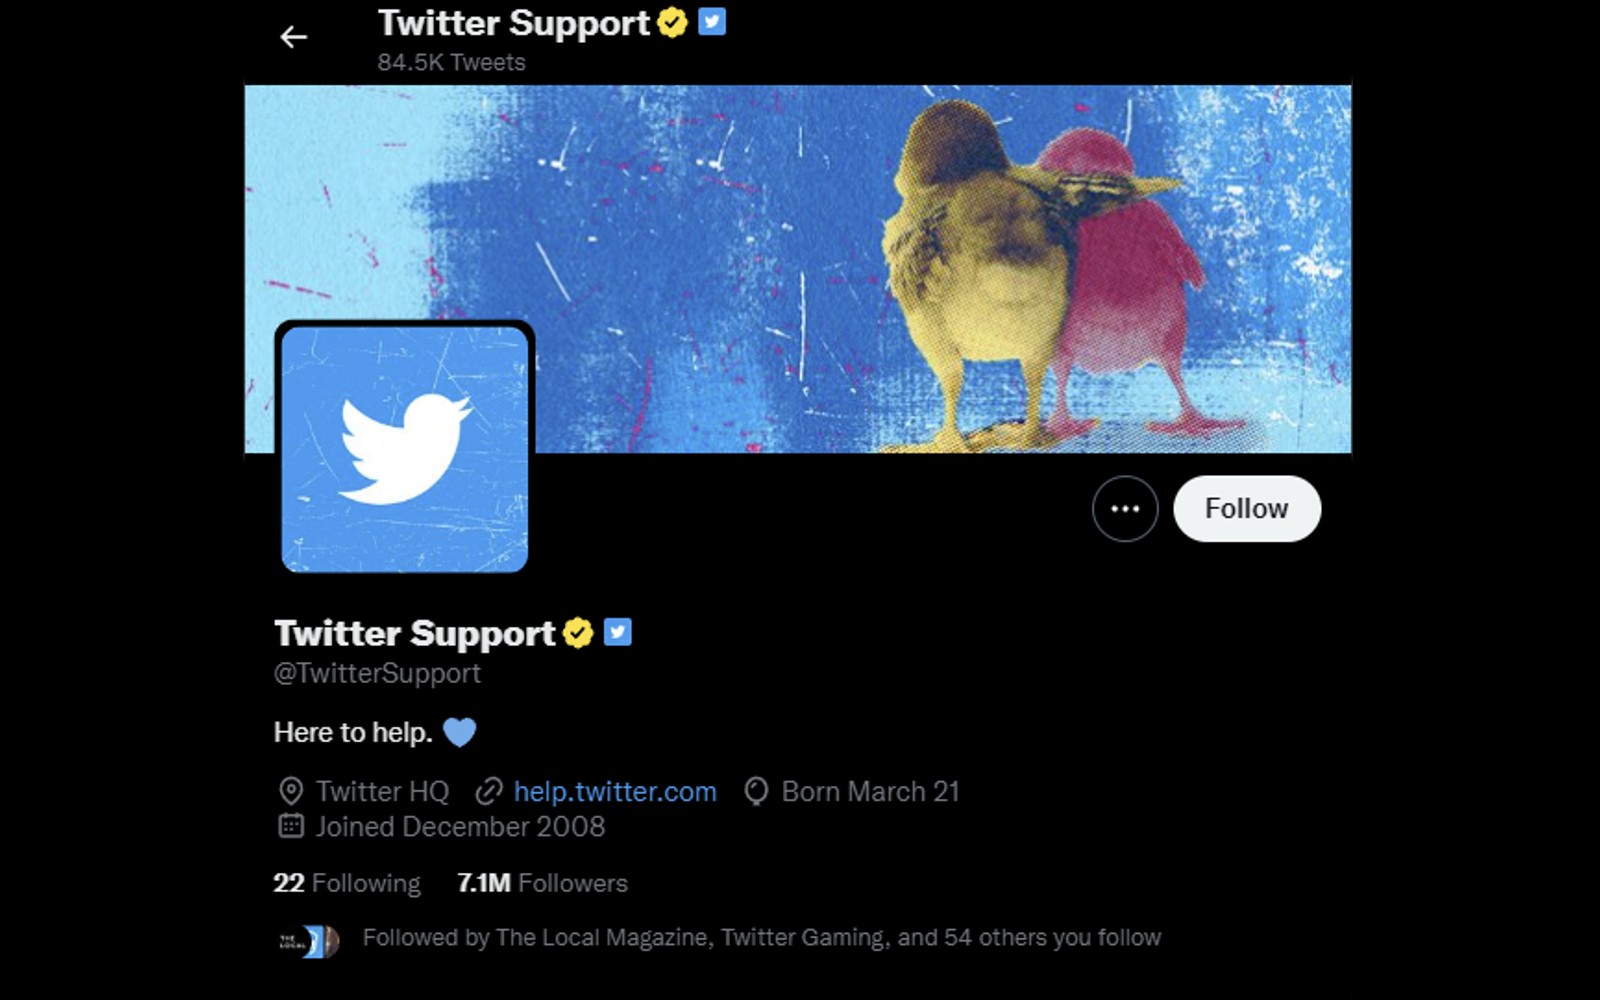 Twitter Support